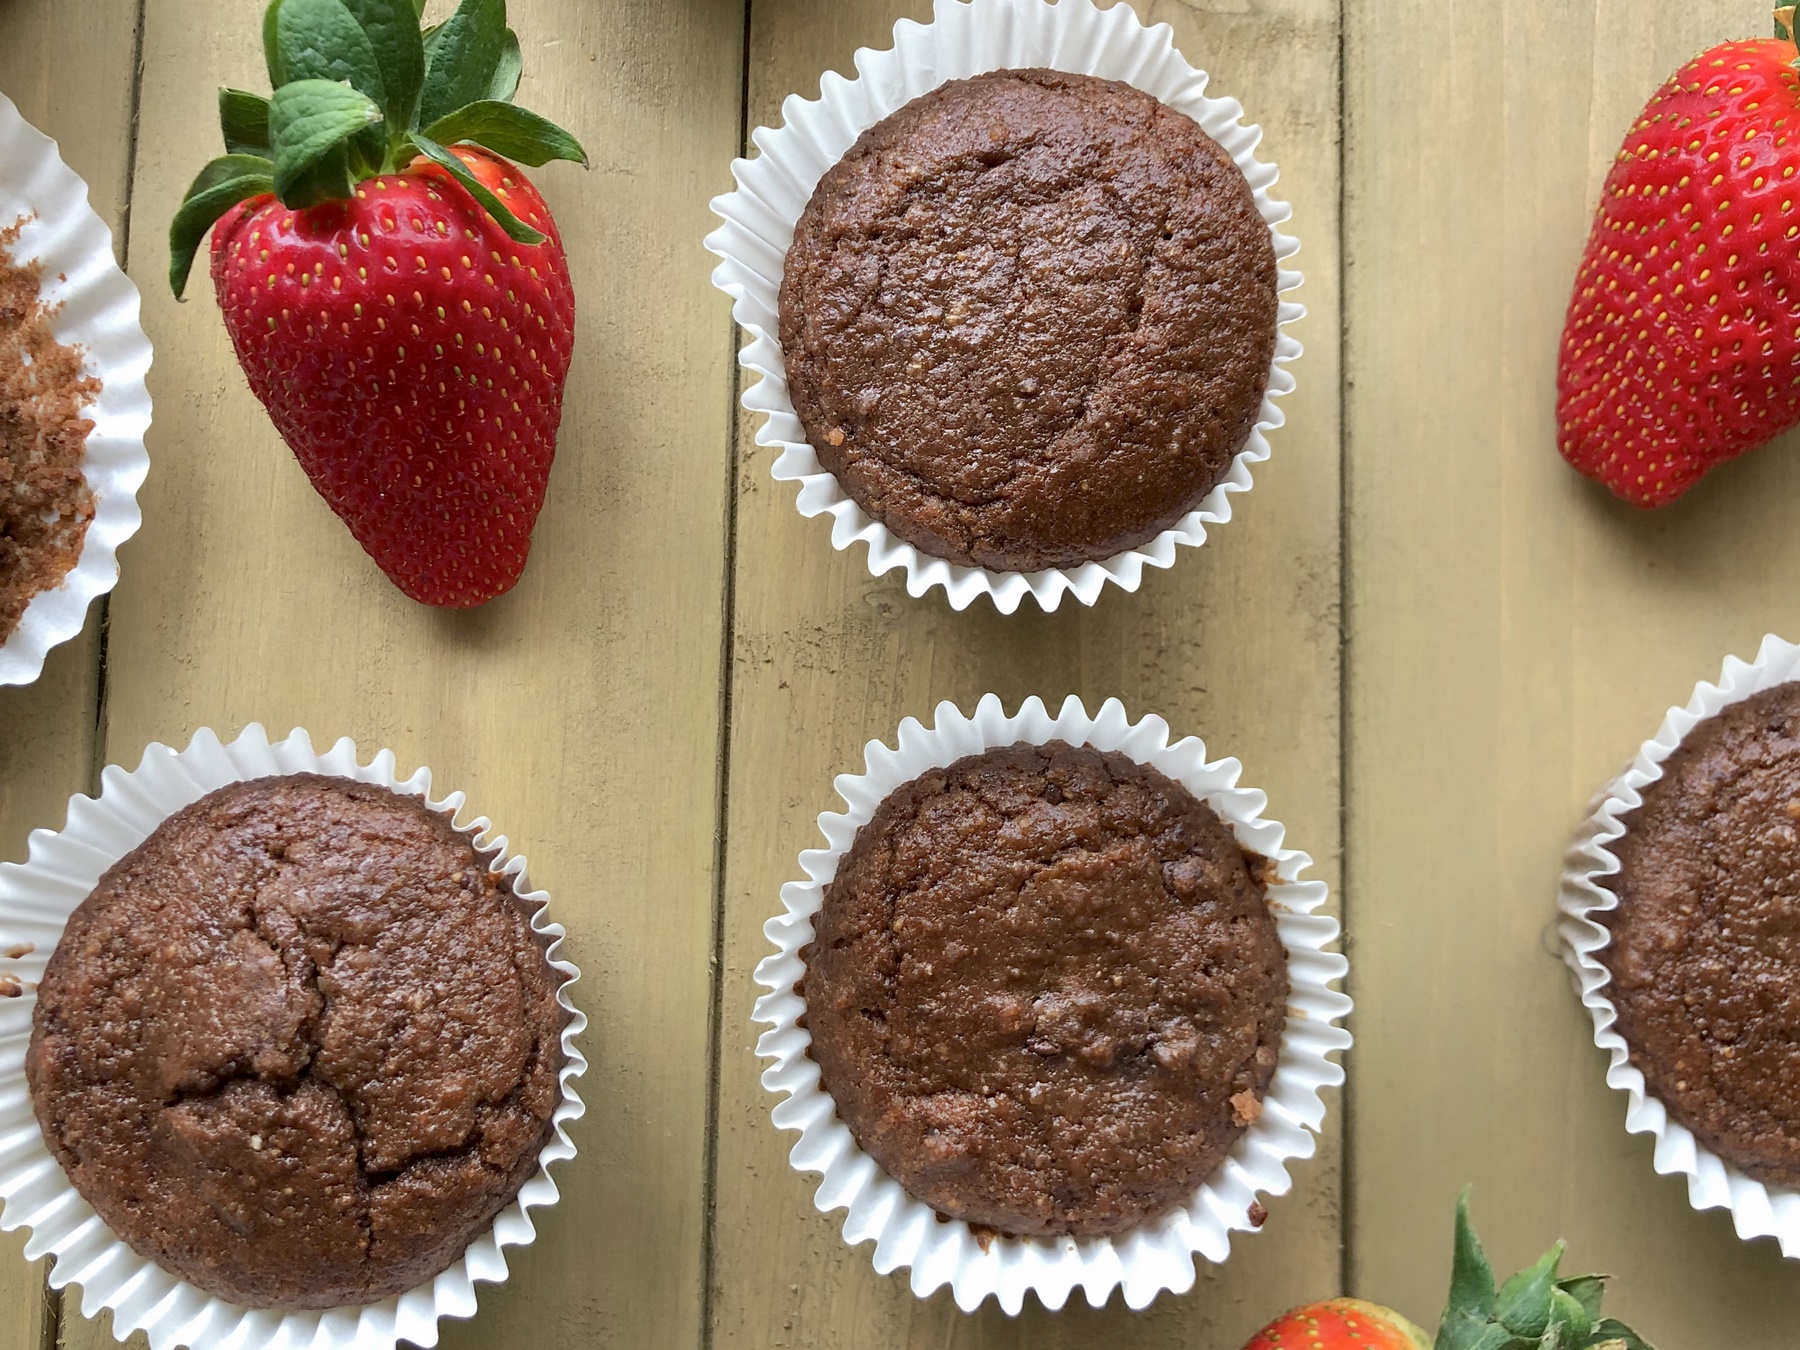 These Double Chocolate Muffins are the real deal! Perfect as they are or warmed up with some cream.